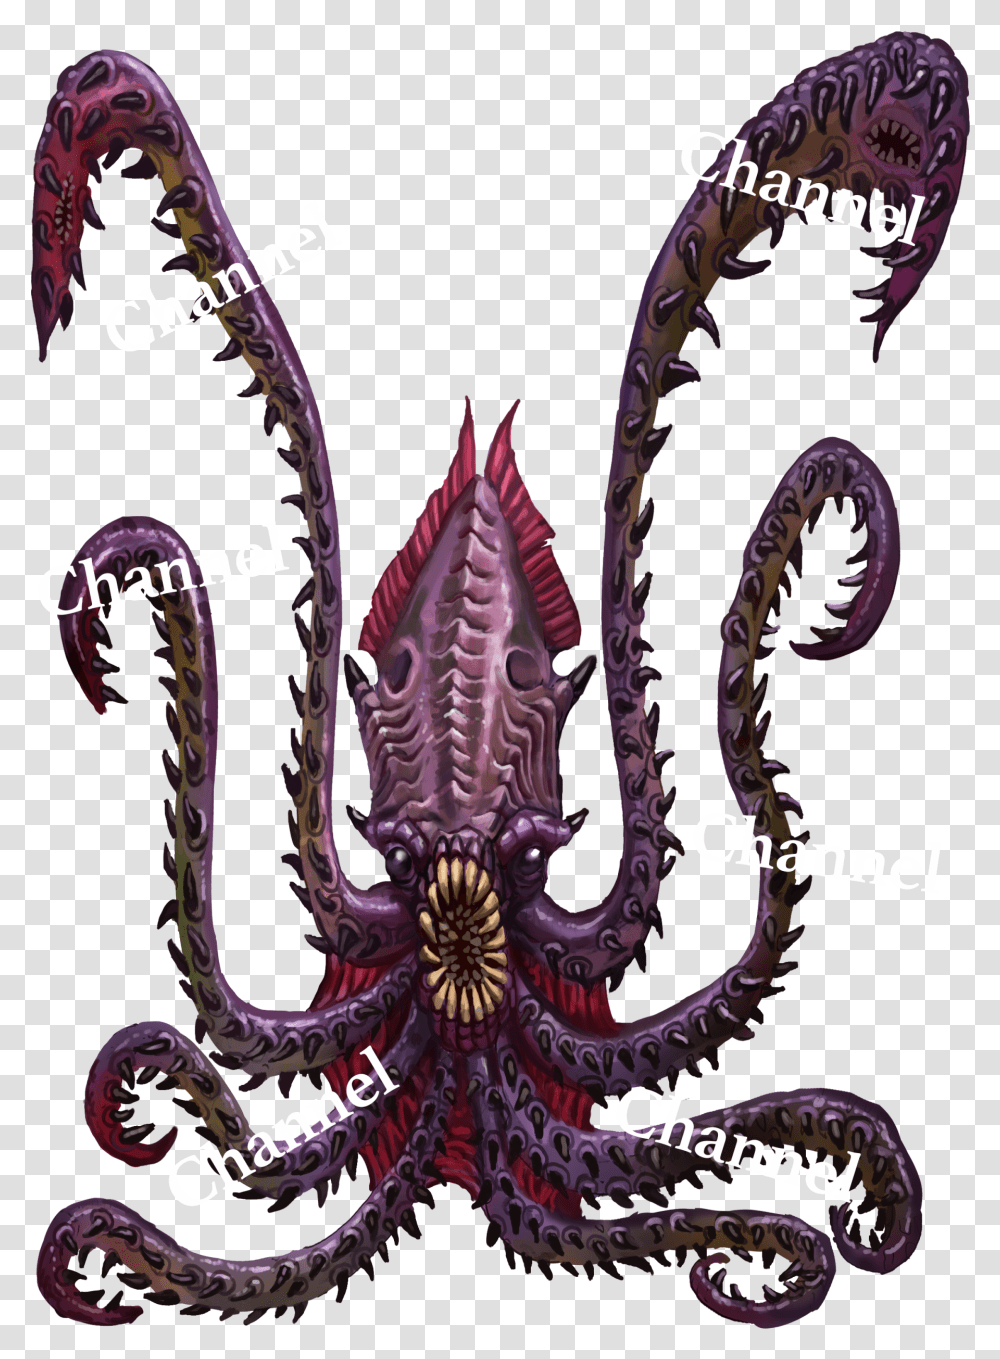 How To Use Discord Run Your Dungeon - Pt 2 In Common Octopus, Pattern, Squid, Seafood, Sea Life Transparent Png